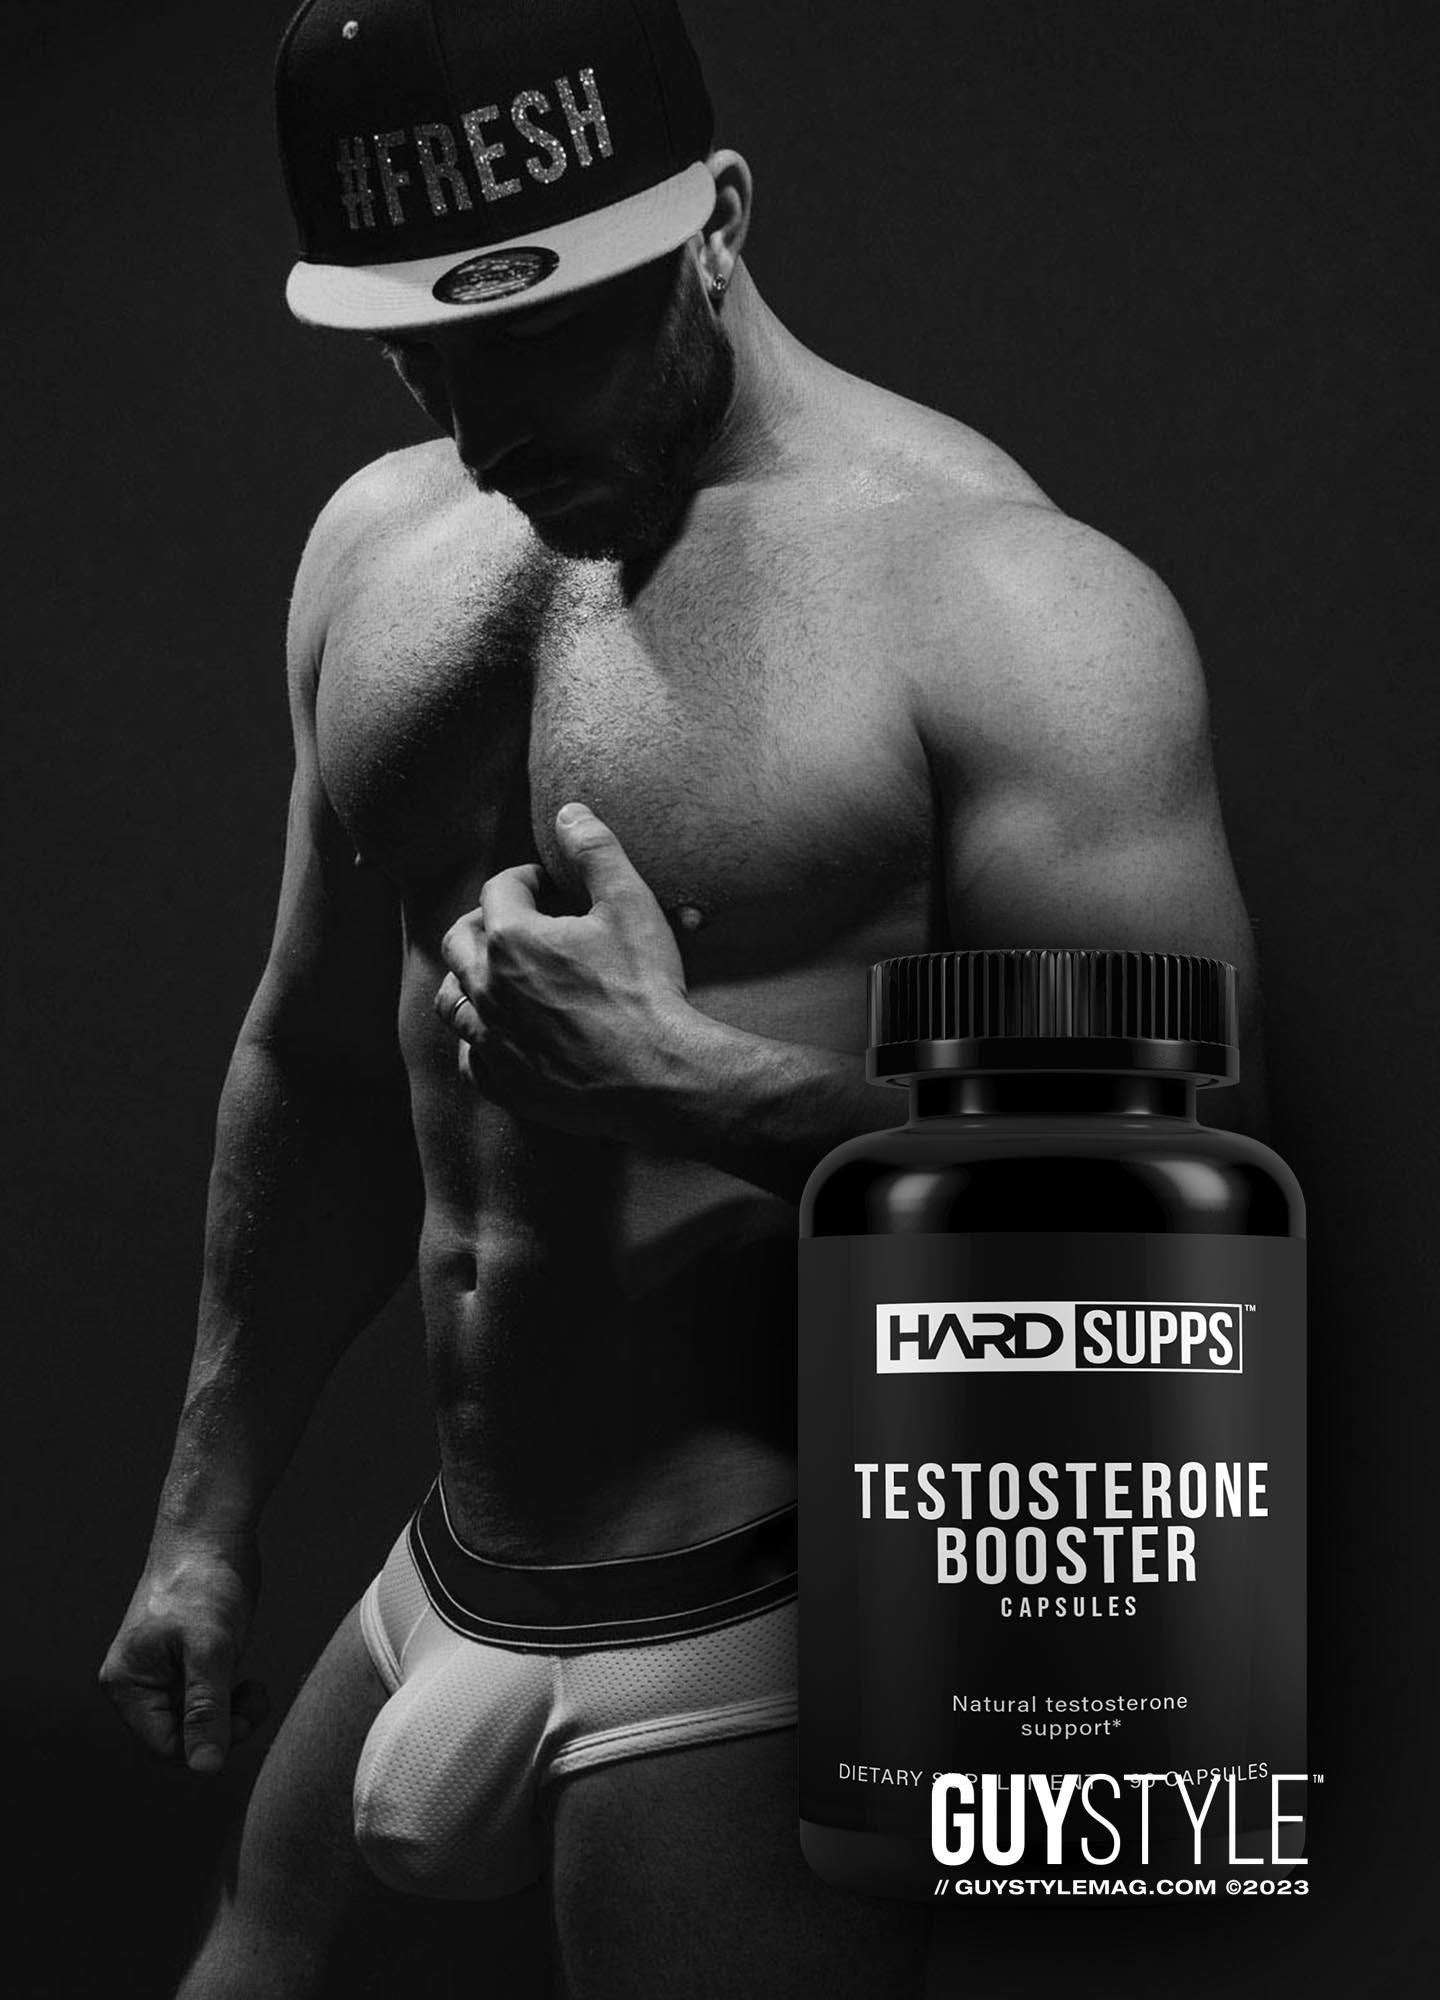 PUMP IT UP: Boost Your Testosterone and Unleash Your Inner Stud – by Maxwell Alexander, Fitness Model, Certified Fitness Trainer, Certified Bodybuilding, and Sports Nutrition Coach – Presented by HARD SUPPS